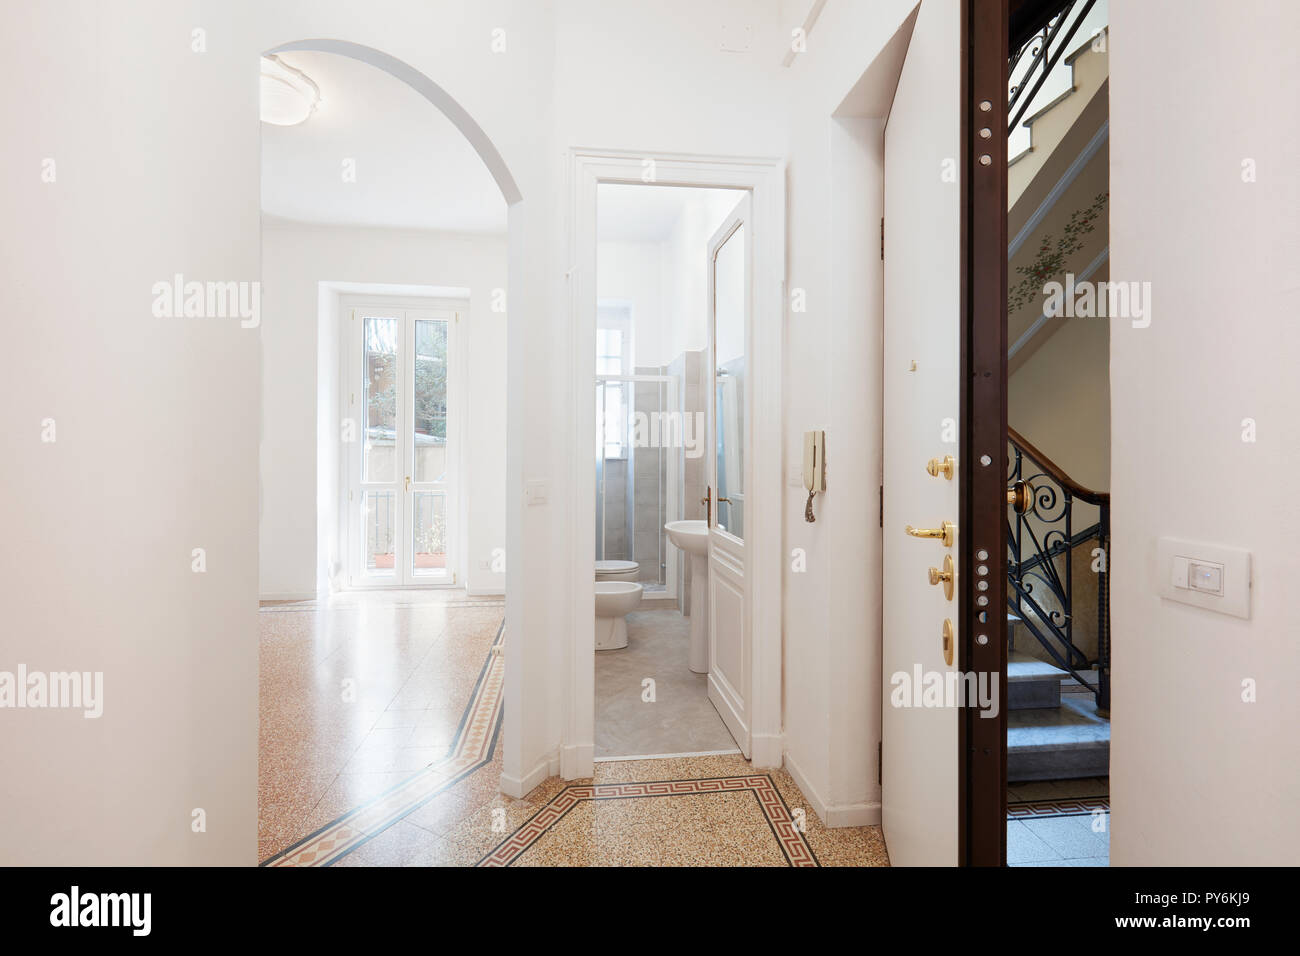 Empty renovated apartment entrance with security door, bathroom and living room Stock Photo